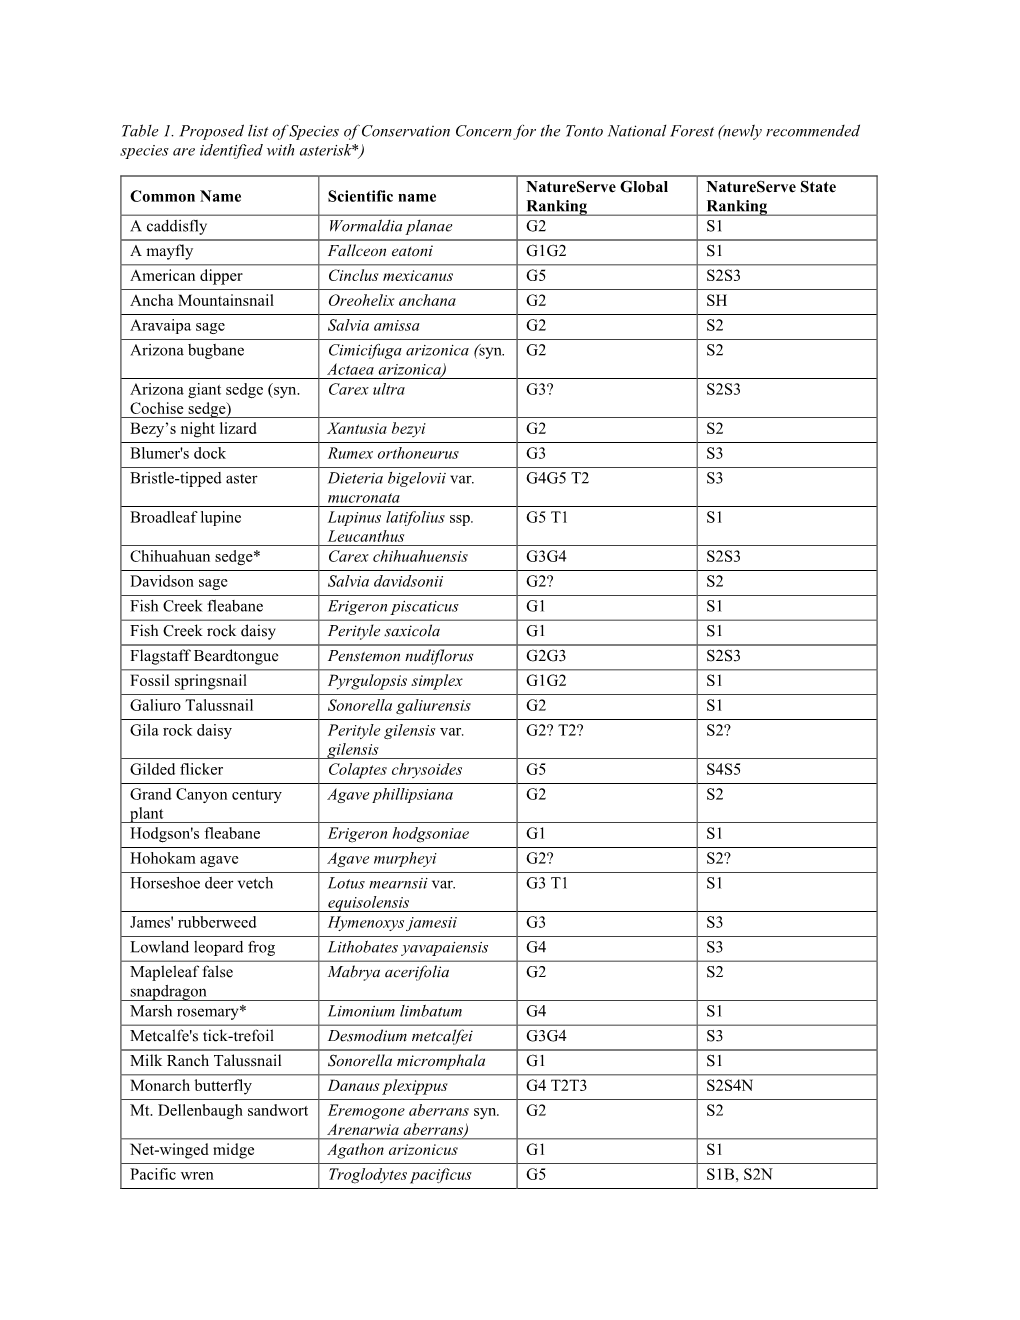 Table 1. Proposed List of Species of Conservation Concern for the Tonto National Forest (Newly Recommended Species Are Identified with Asterisk*)